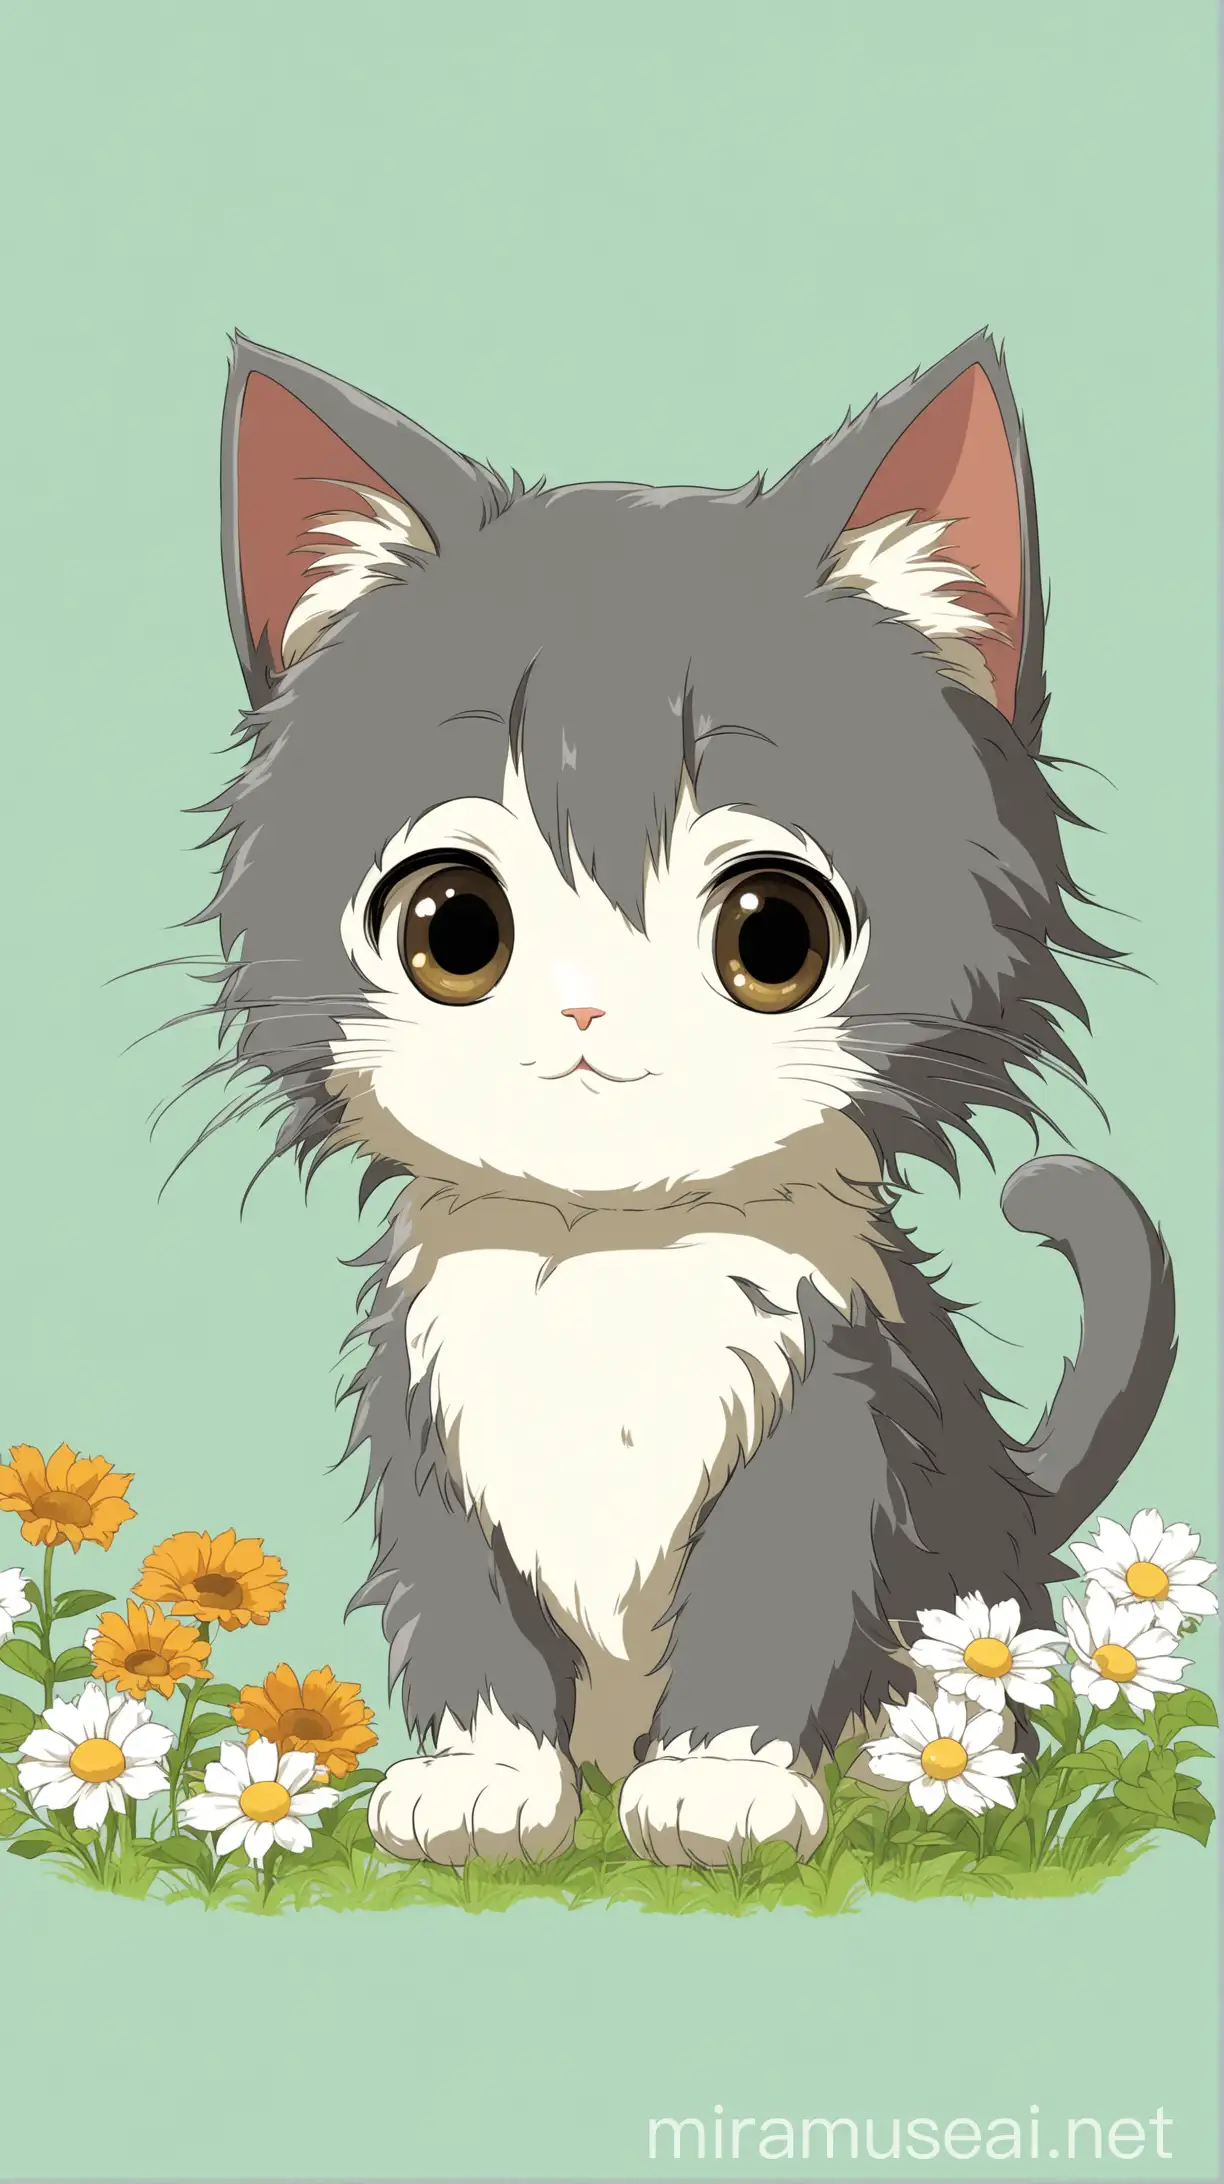 Adorable Anime Style Ghibli Wallpaper Featuring a Cute Kitten